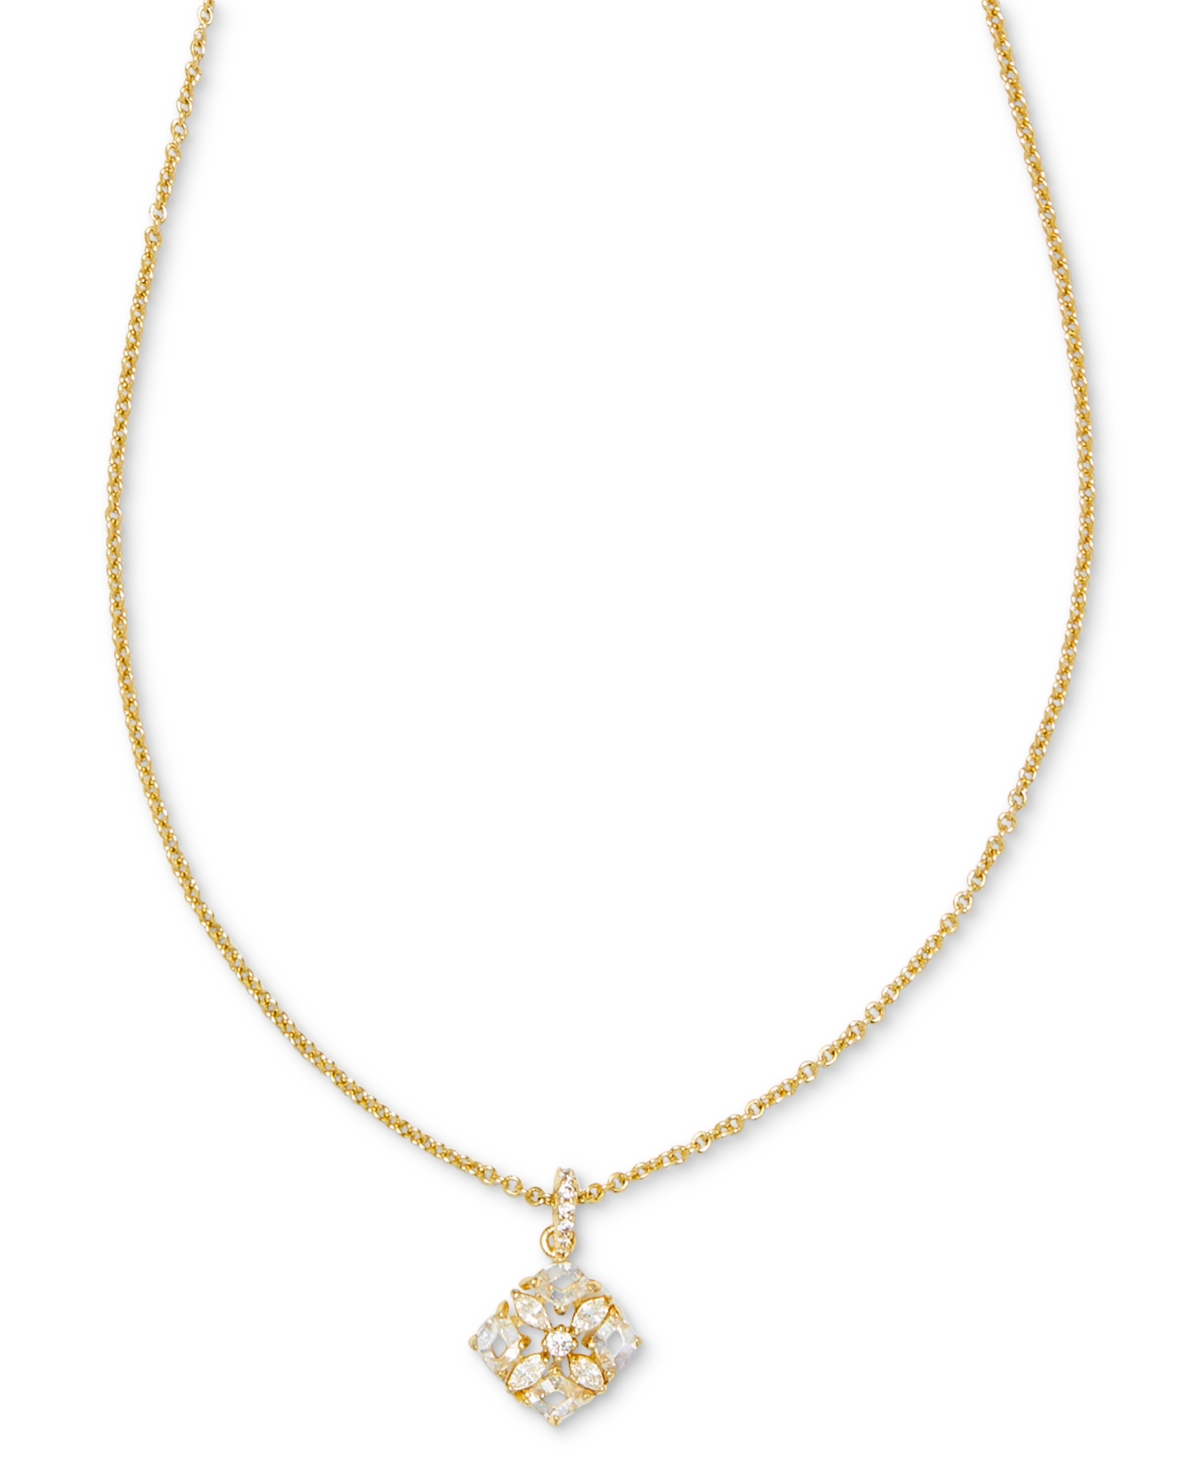 Kendra Scott 14k Gold-plated Mixed Cubic Zirconia 19" Adjustable Pendant Necklace In White Crystal